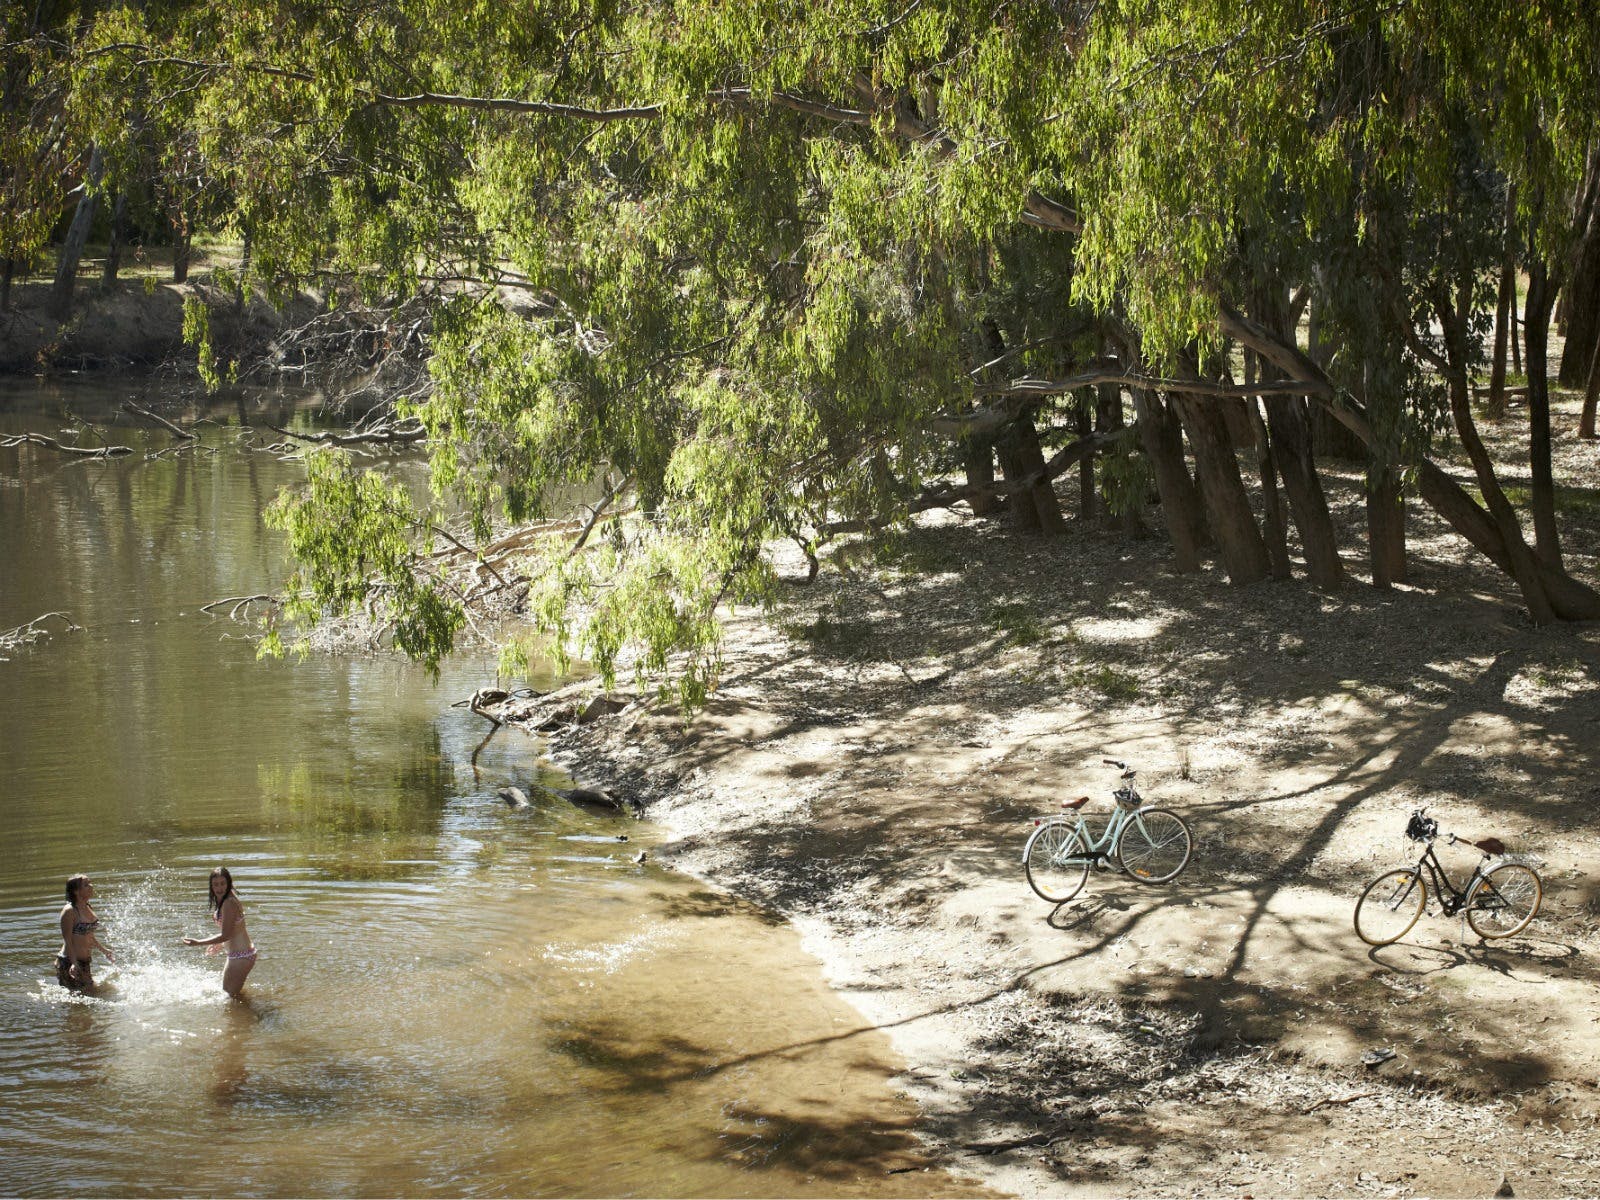 People swimming in Ovens River on a summer day, sandbar wattle trees